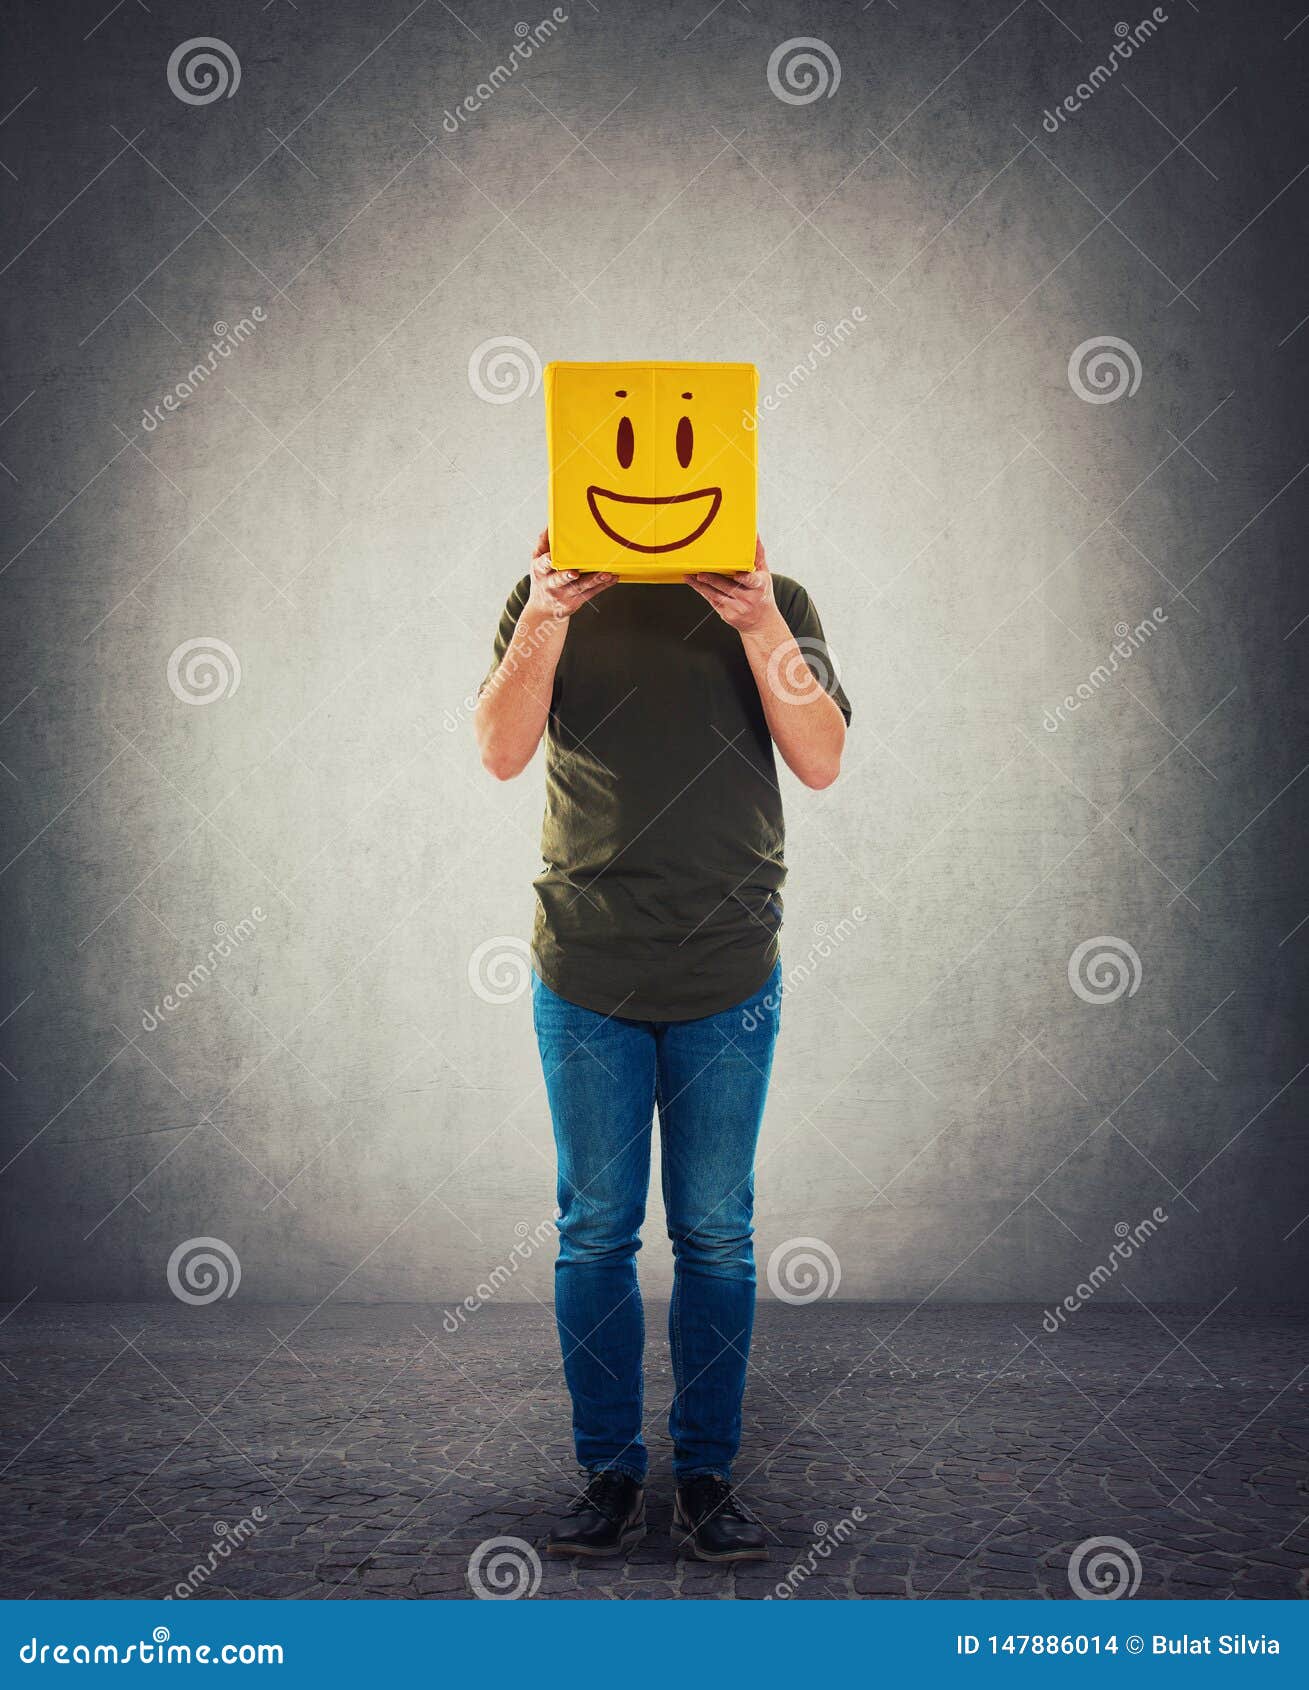 Incognito Person Holding a Yellow Box instead Head. Introvert